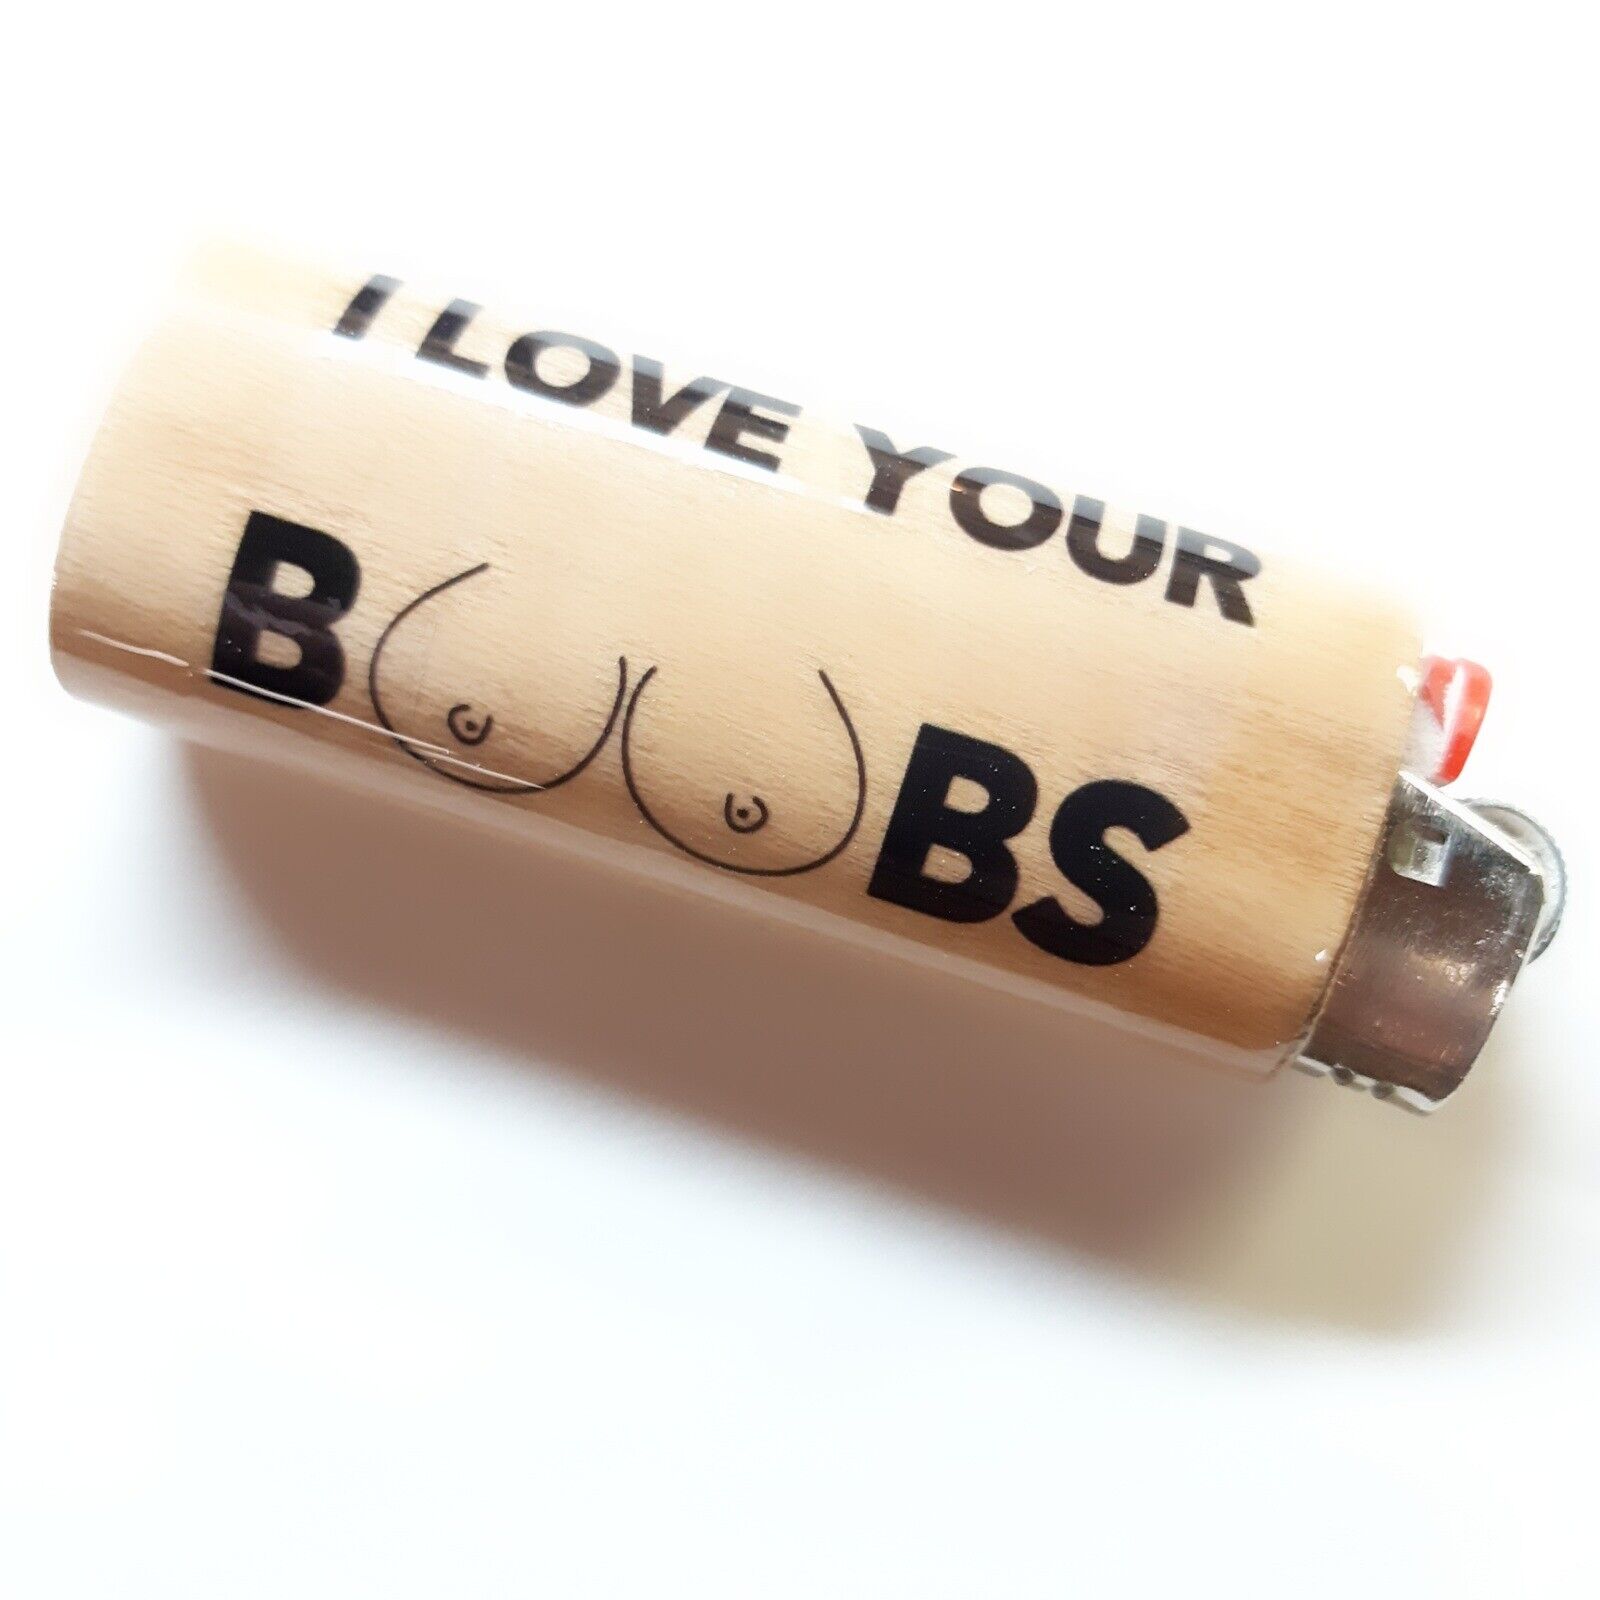 I Love Your Boobs Breasts Tits Lighter Case Holder Sleeve Cover Fits Bic Lighter